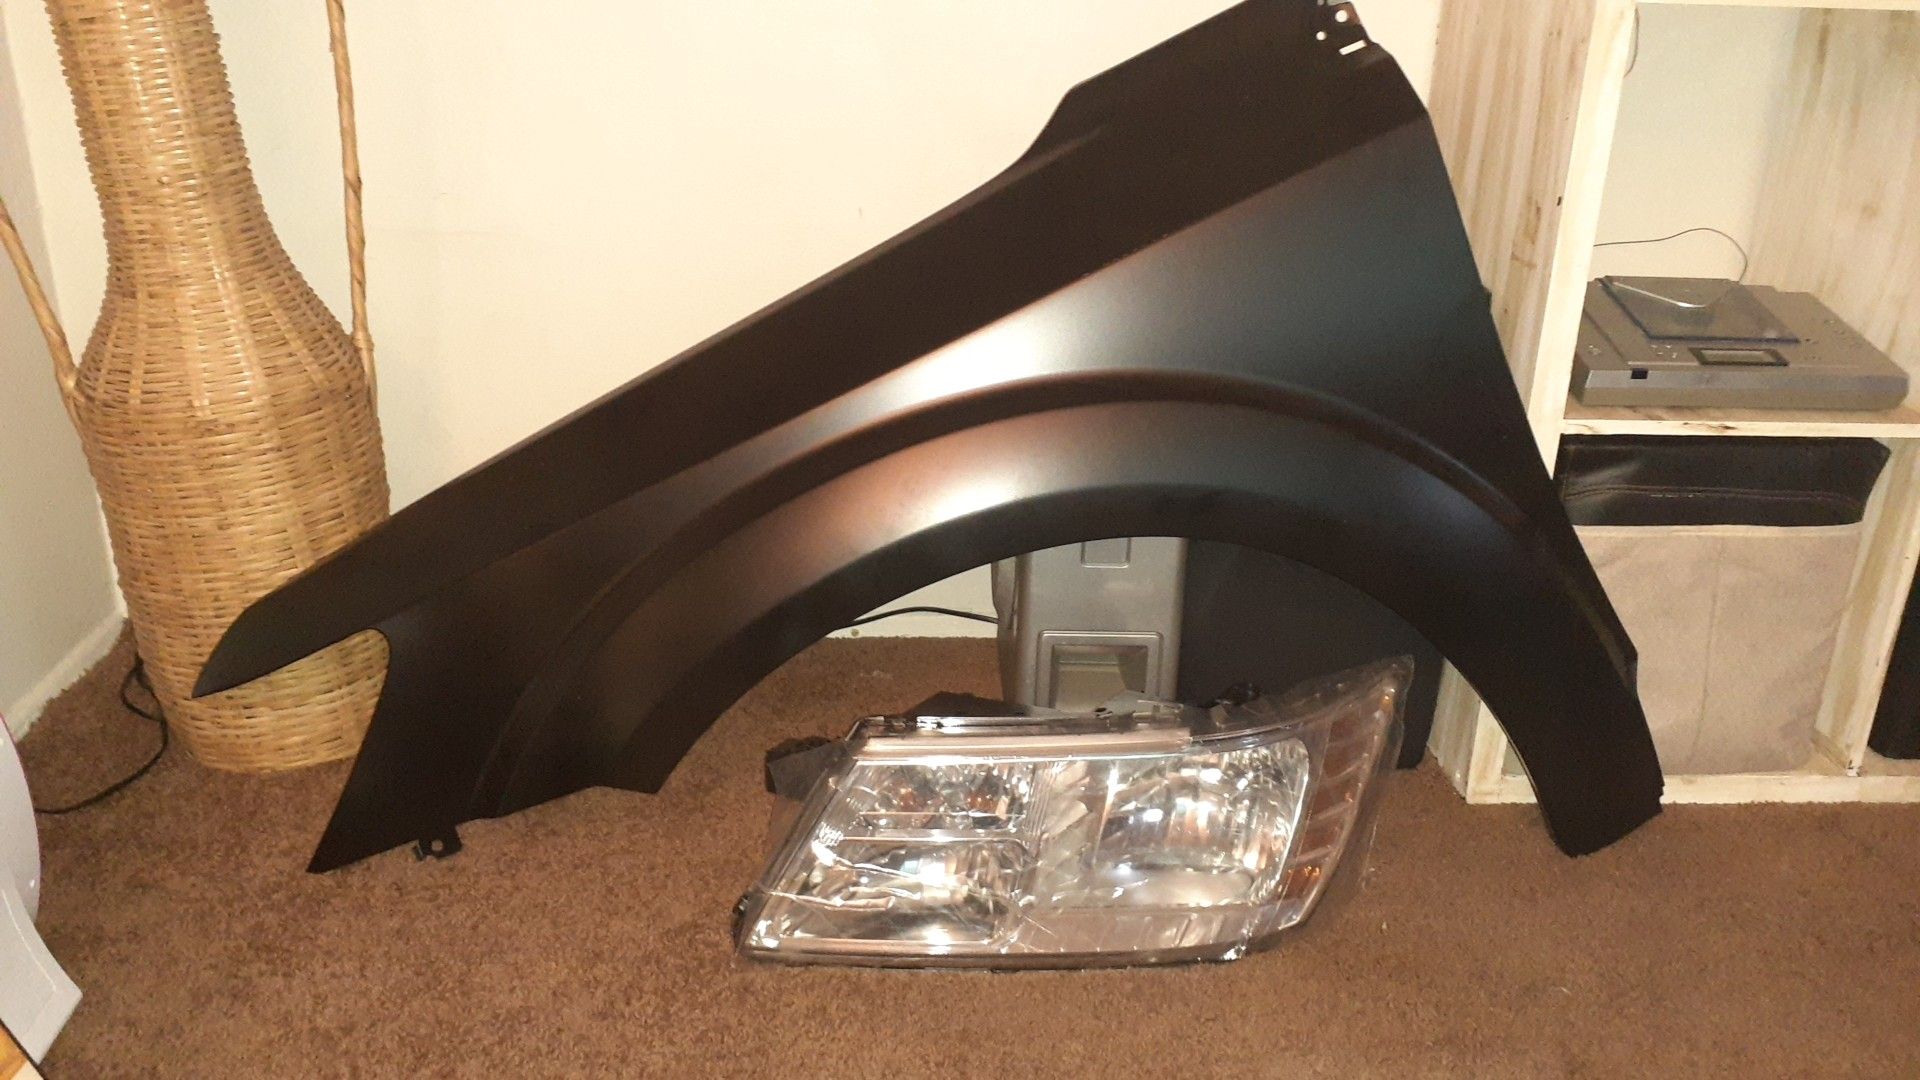 2009to2020 New Dodge Fender&Hheadlight assembly.